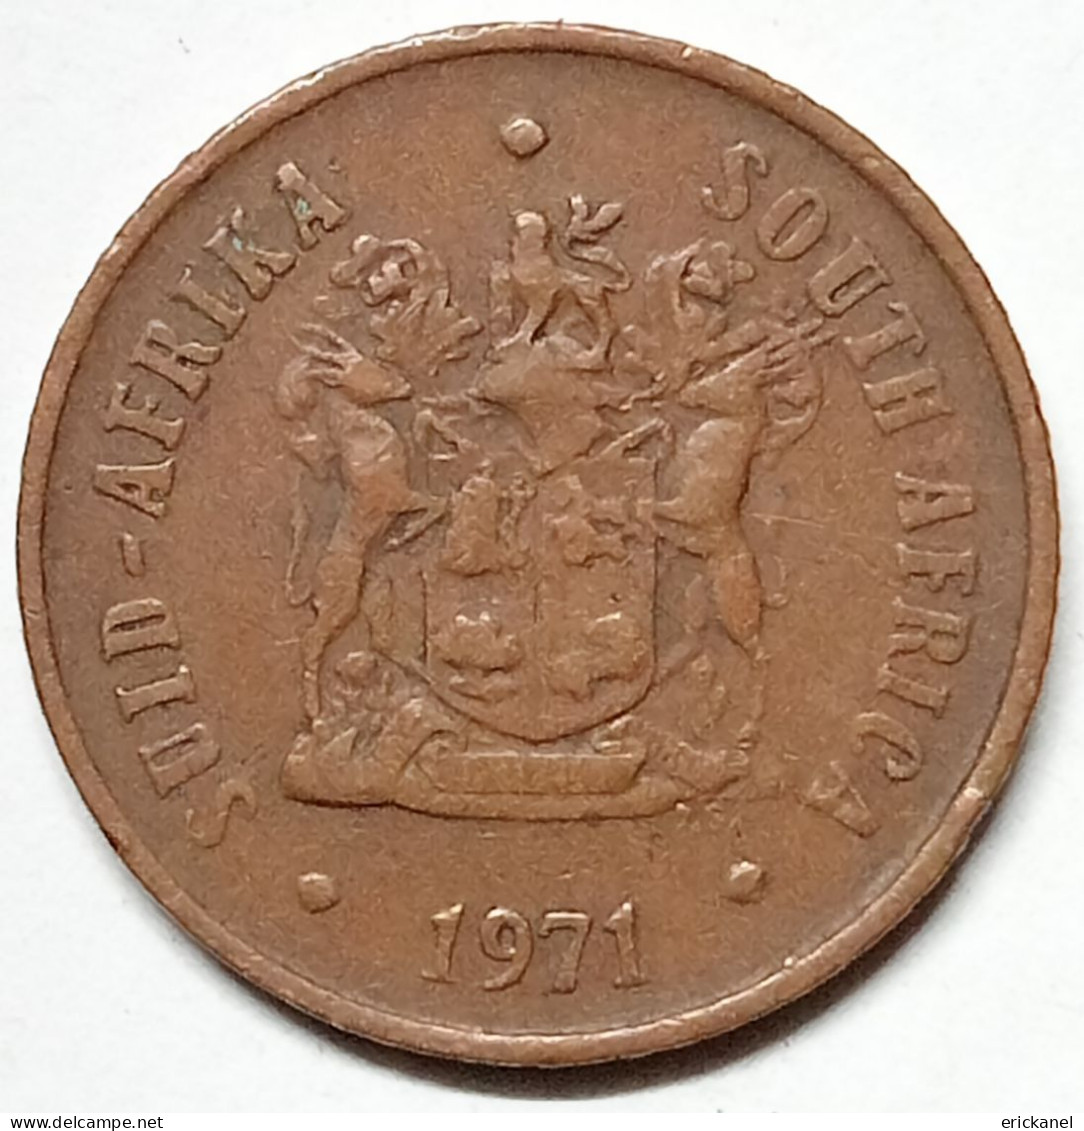 SOUTH AFRICA 1971 1 CENT - South Africa